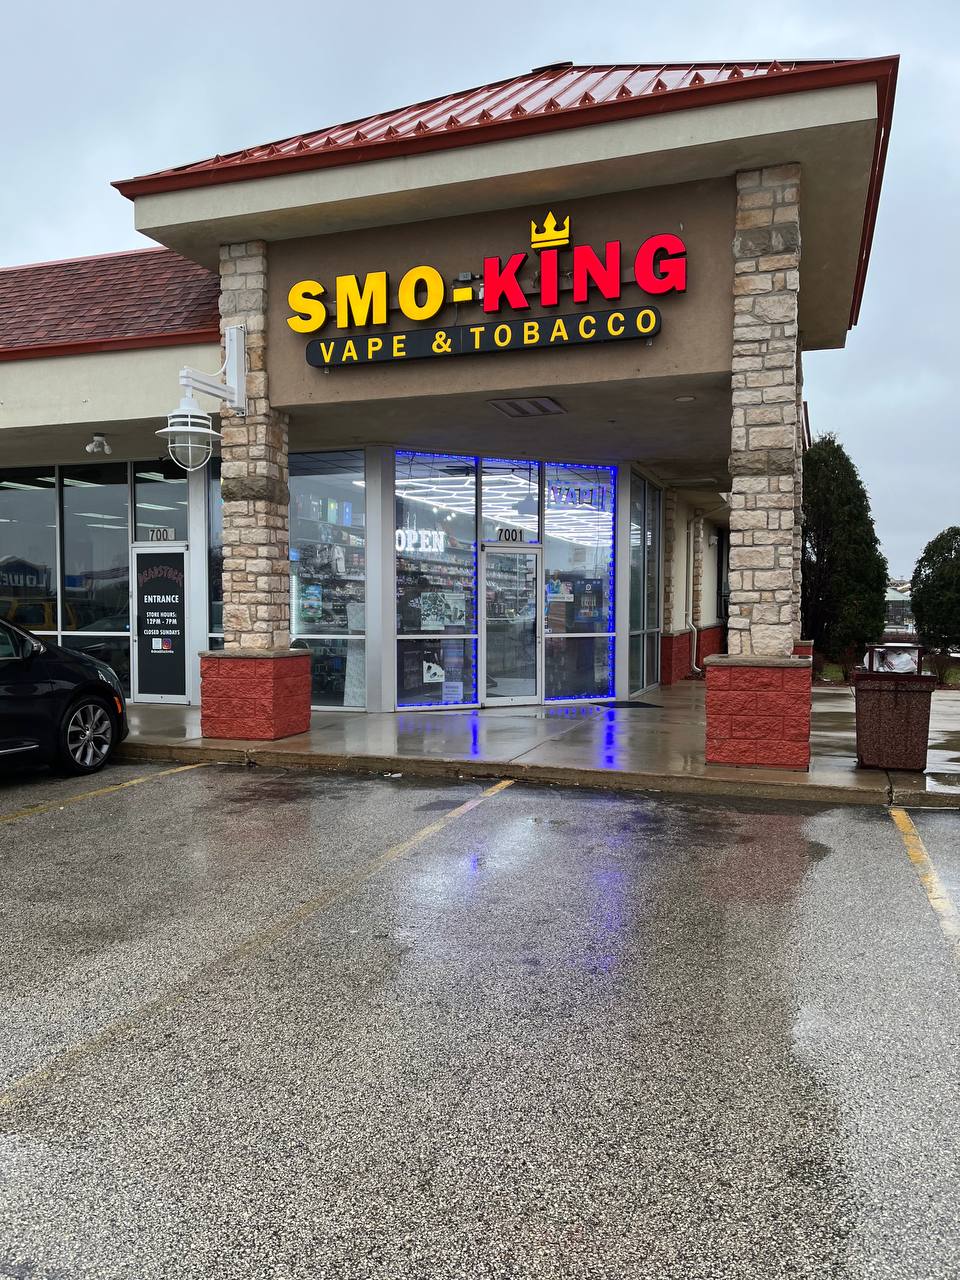 Getcoins - Bitcoin ATM - Inside of Smo-King Vape and Tobacco in Franklin, Wisconsin